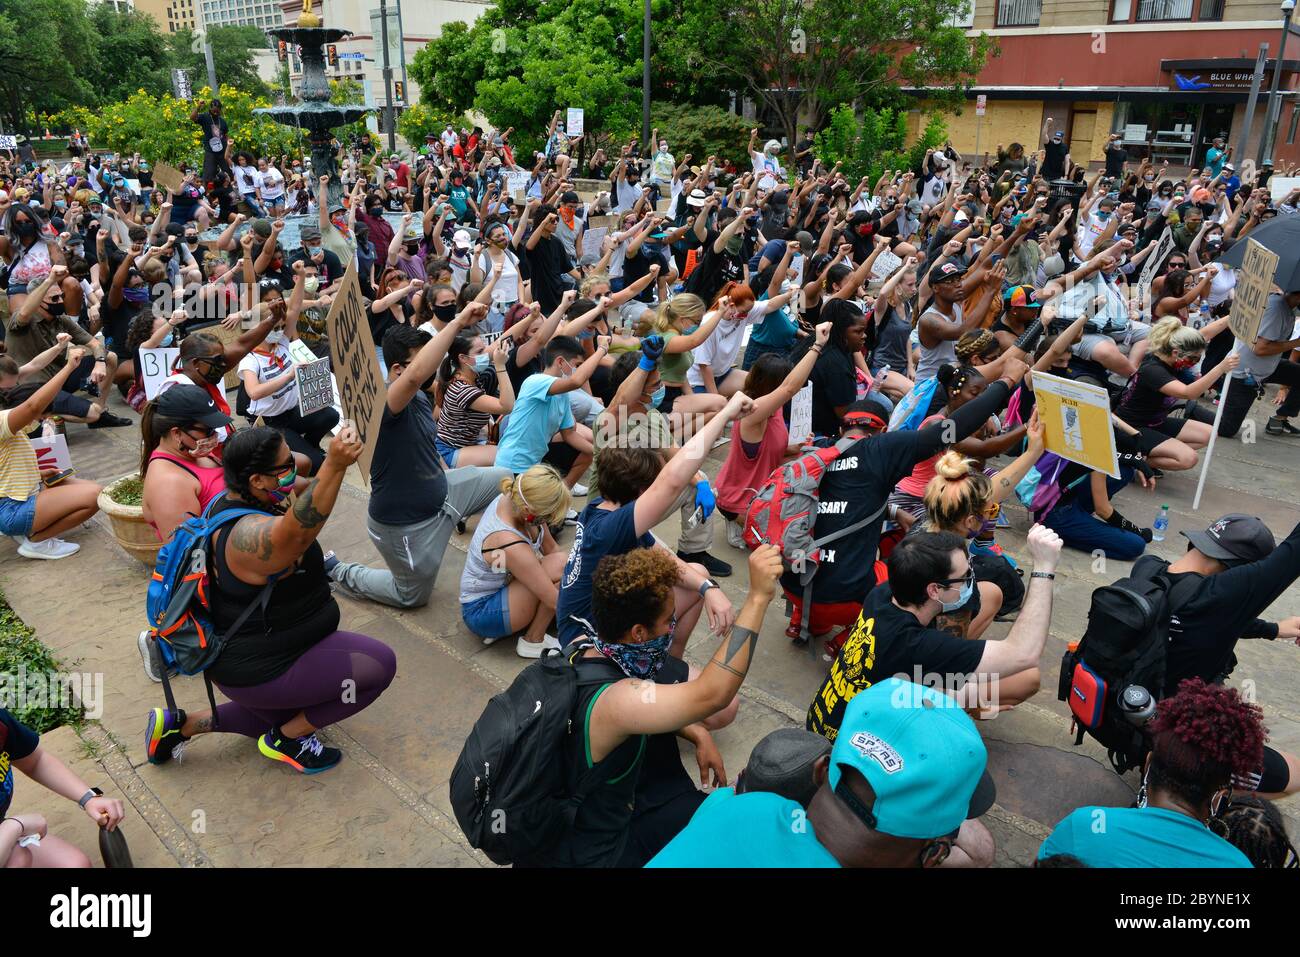 Black Lives Matter demonstrators marched through downtown San Antonio to protest the killings of Marquise Jones and Charles Roundtree by San Antonio Police.Marchers went from the city's Milam Park to the Bexar County Courthouse. The demostration was peaceful and no arrests were made. Stock Photo